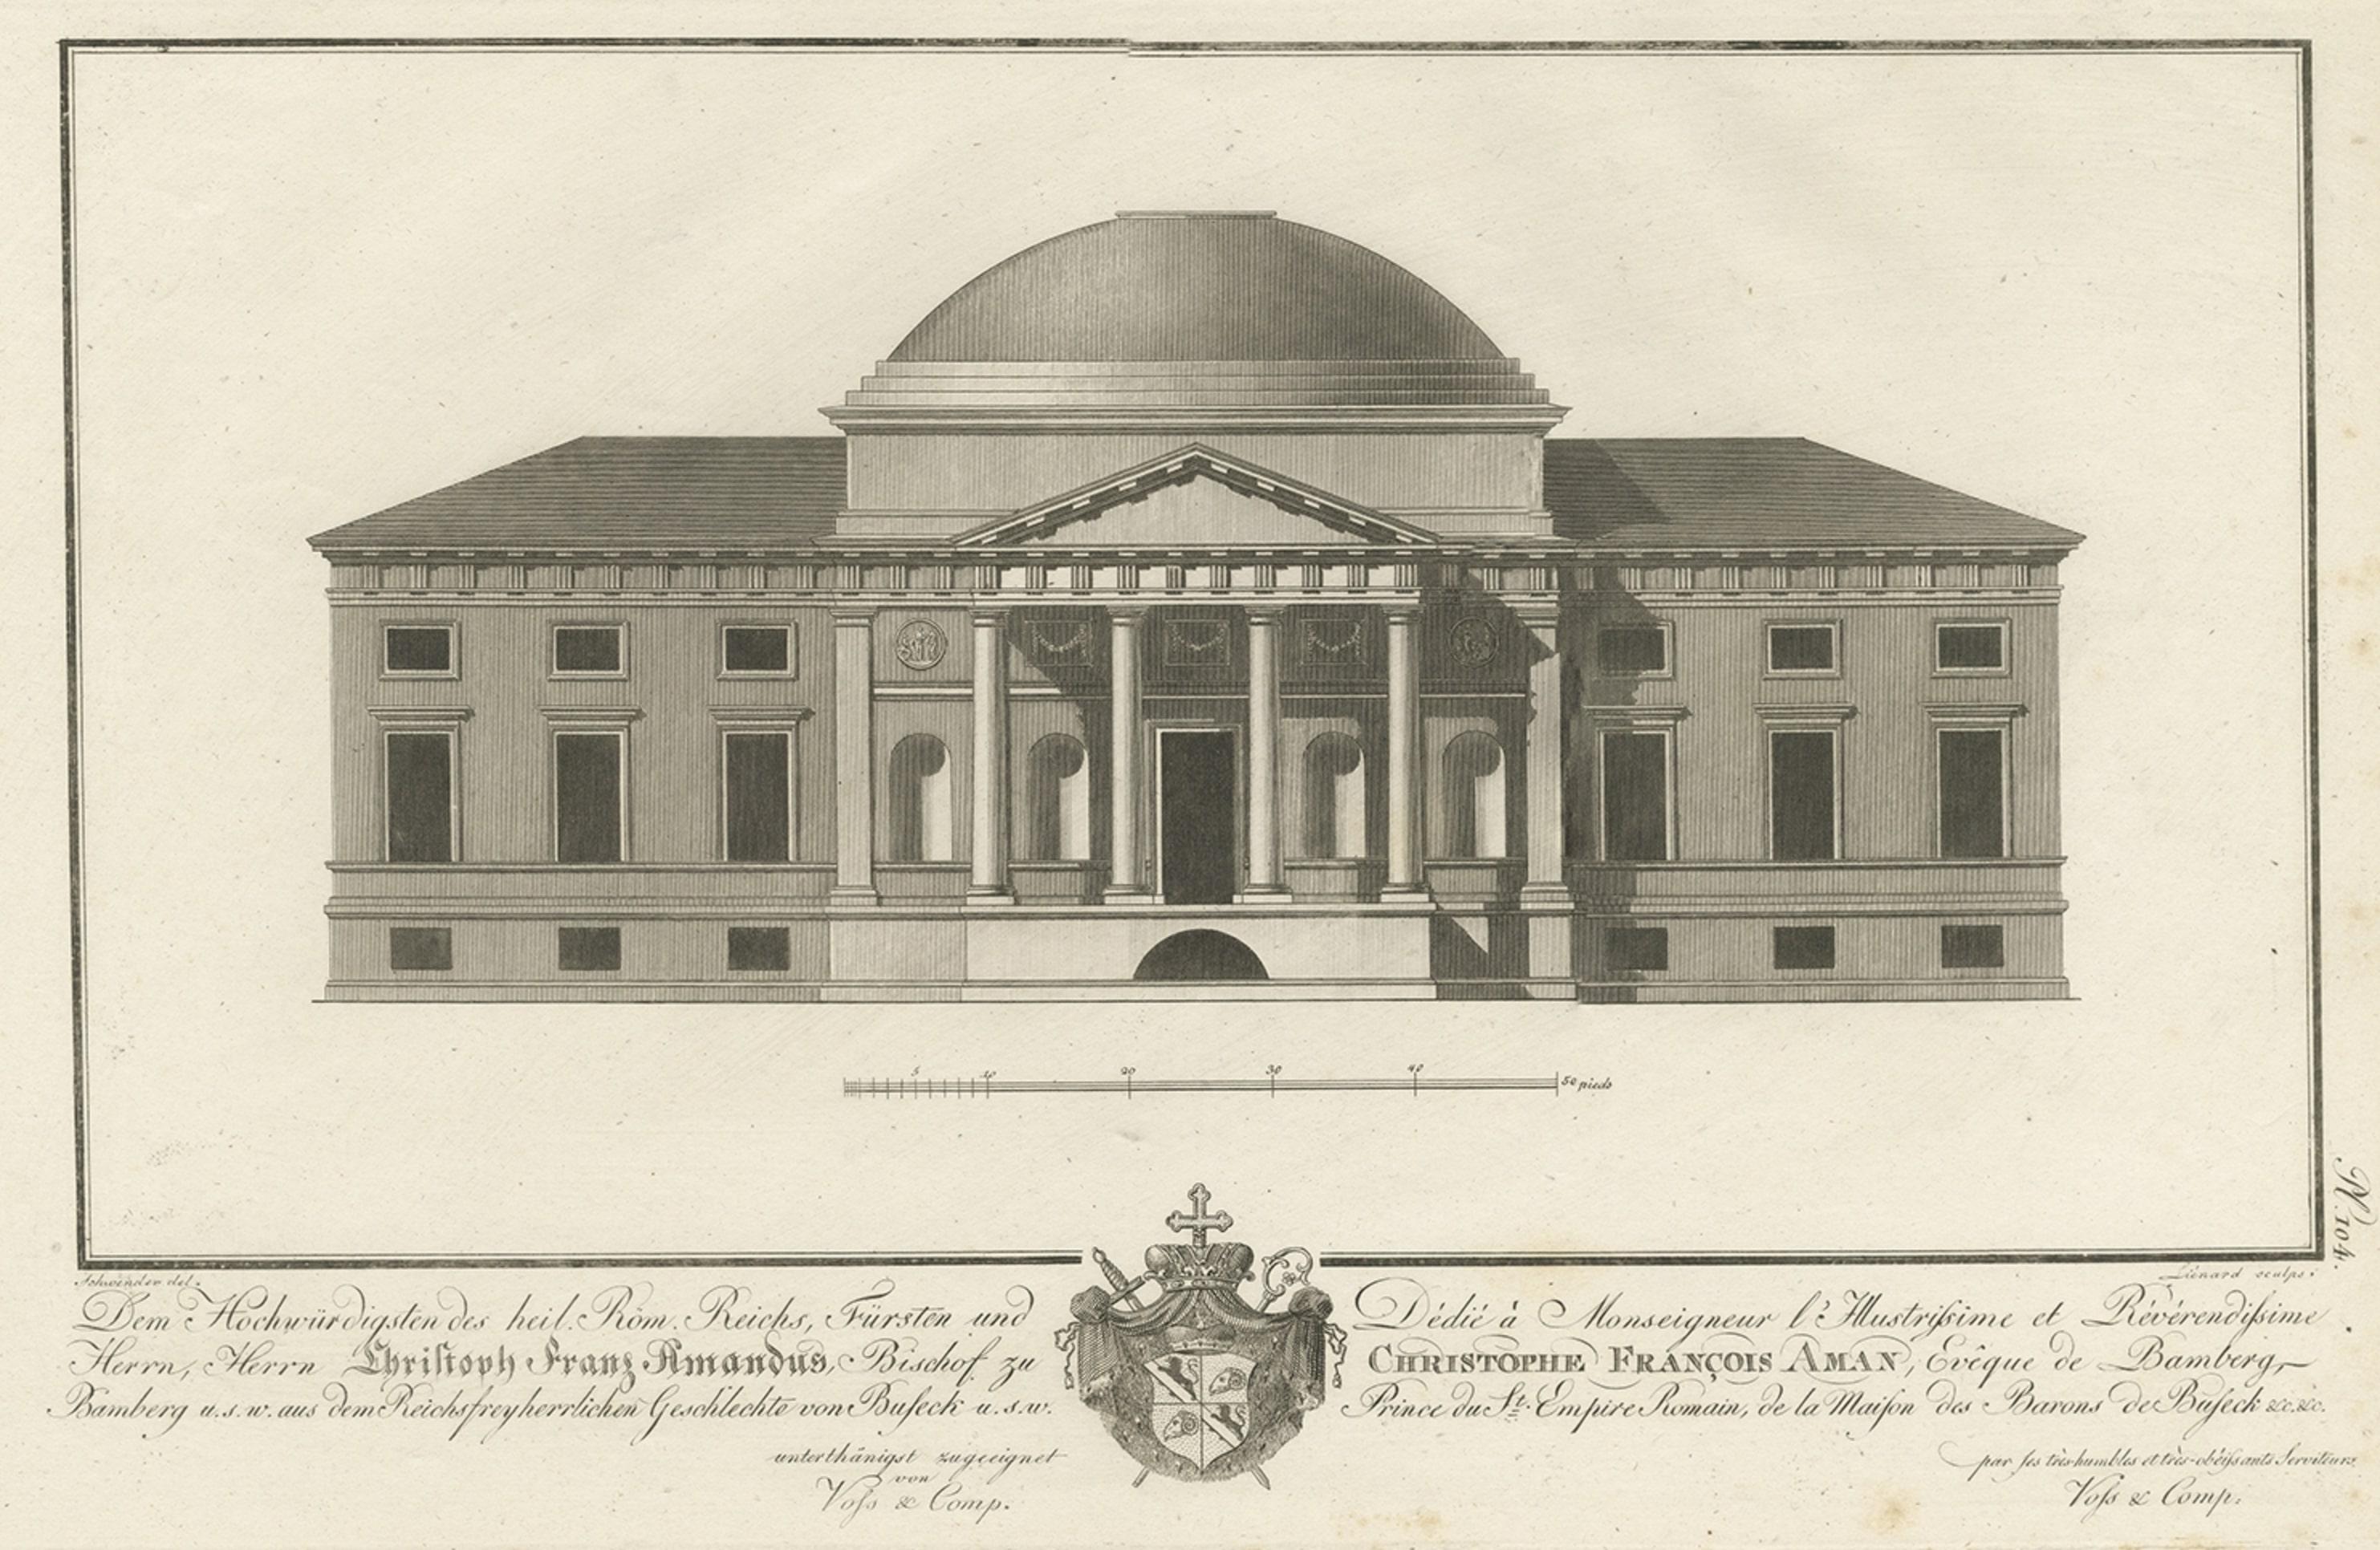 Antique Print of the Residence of Christoph Franz Amandus by Stieglitz, c.1800